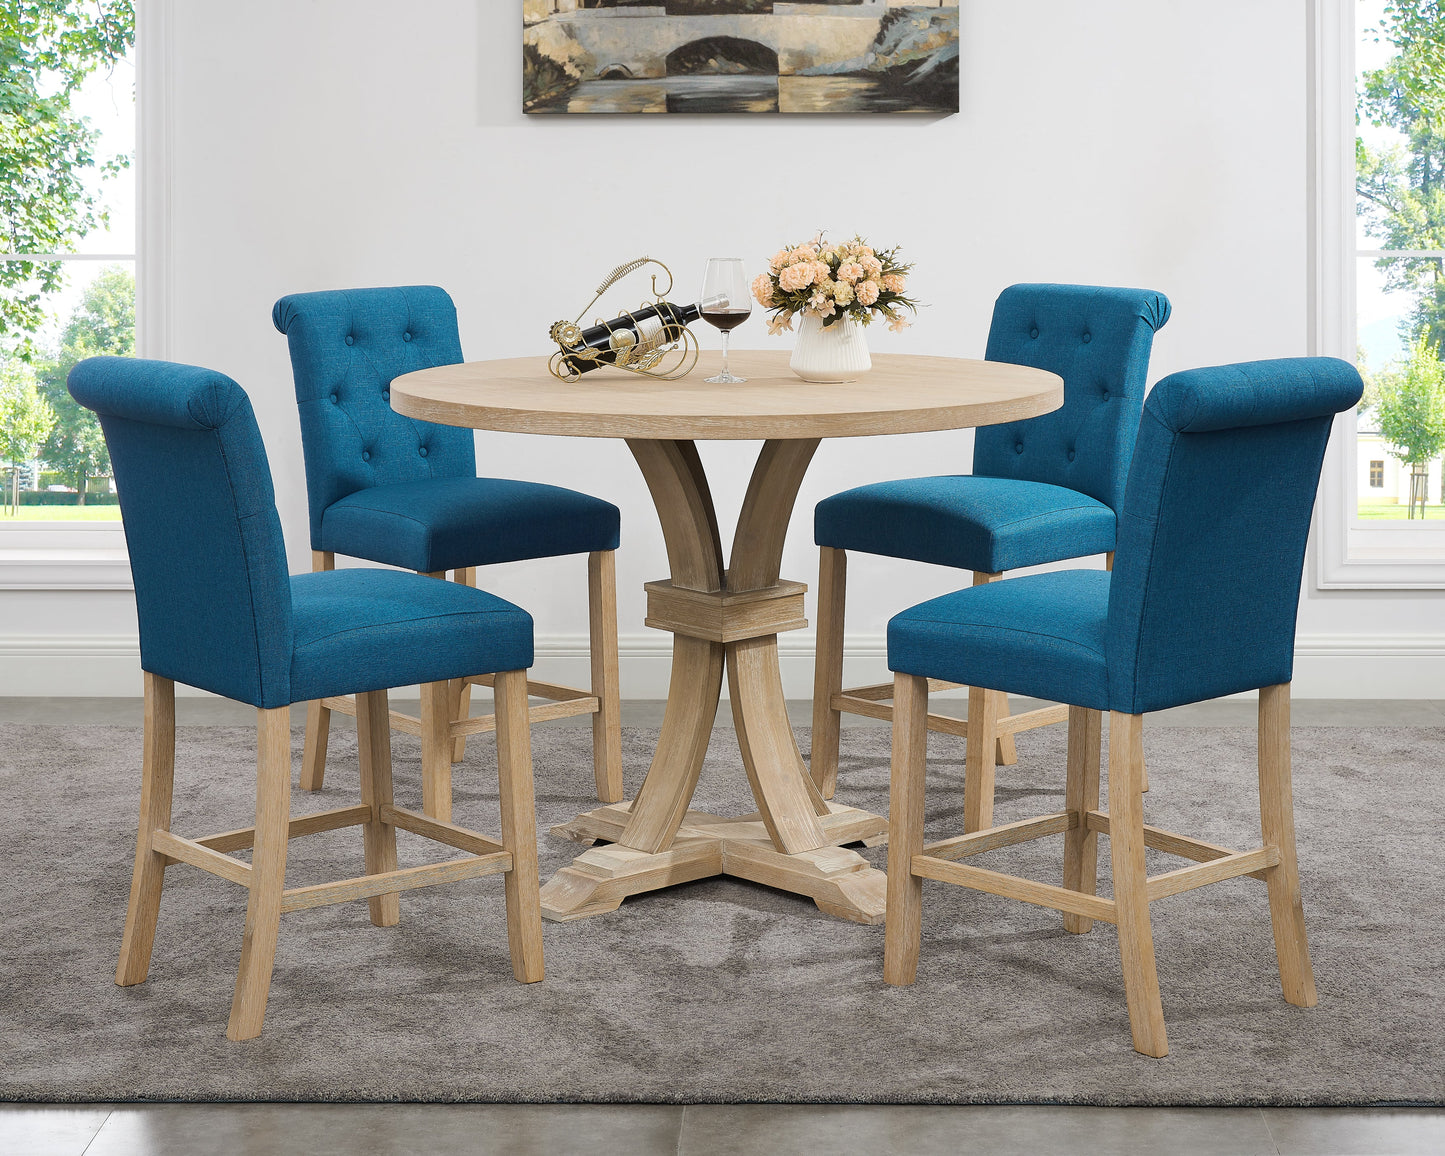 Siena White-washed Finished 5-Piece Counter Height Dining set, Pedestal Round Table with Blue Chairs